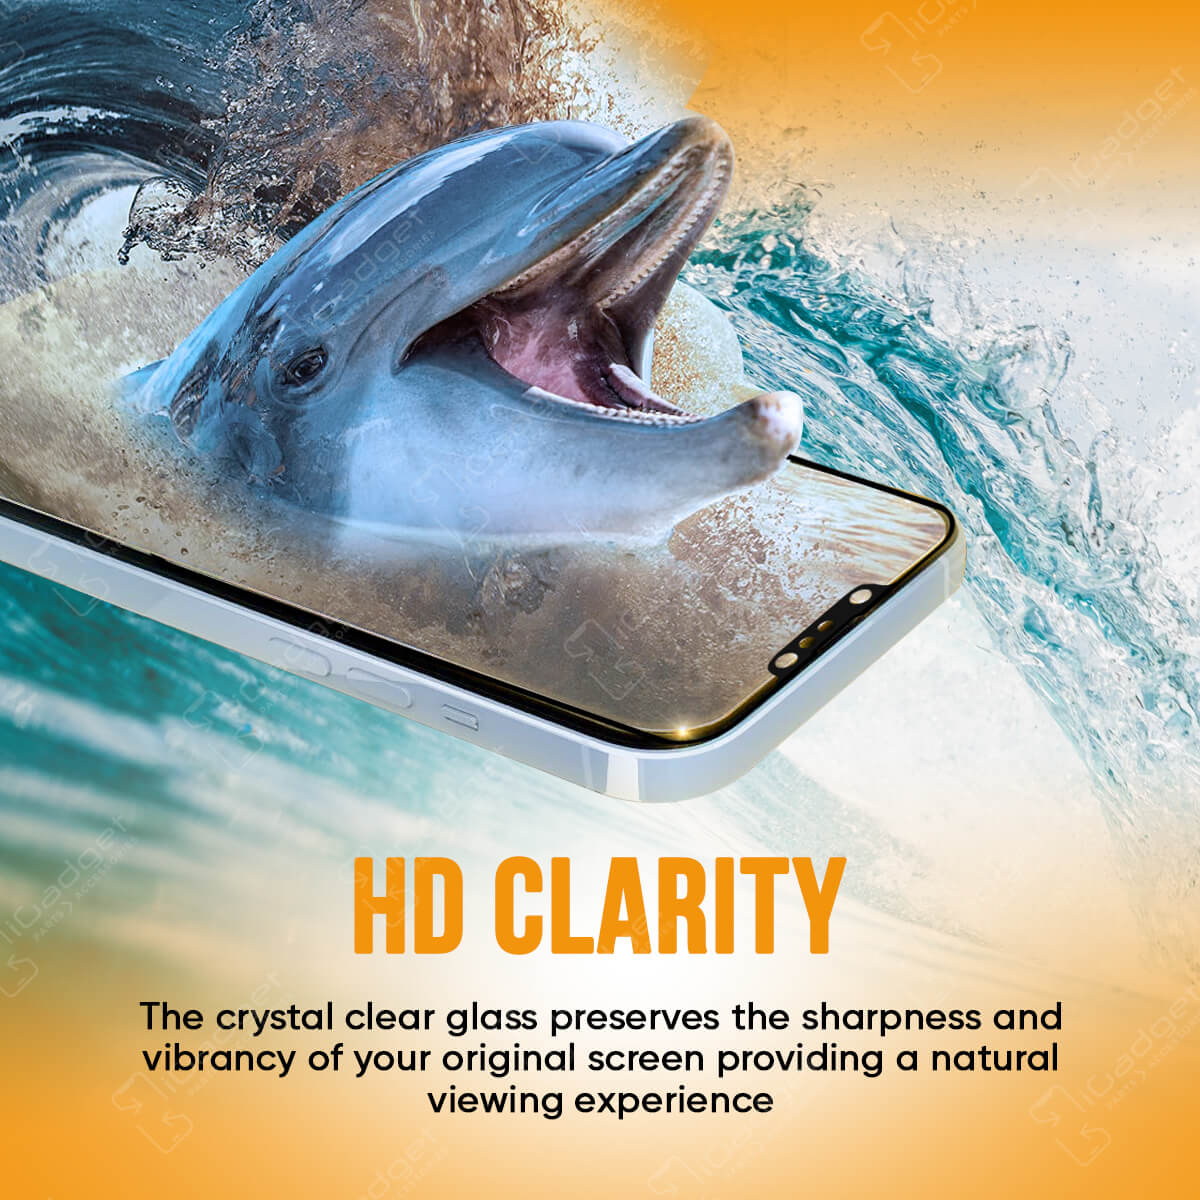 iGadget Full Coverage Screen Protector with crystal clear glass ehich preserves the sharpness and vibrancy of your screen